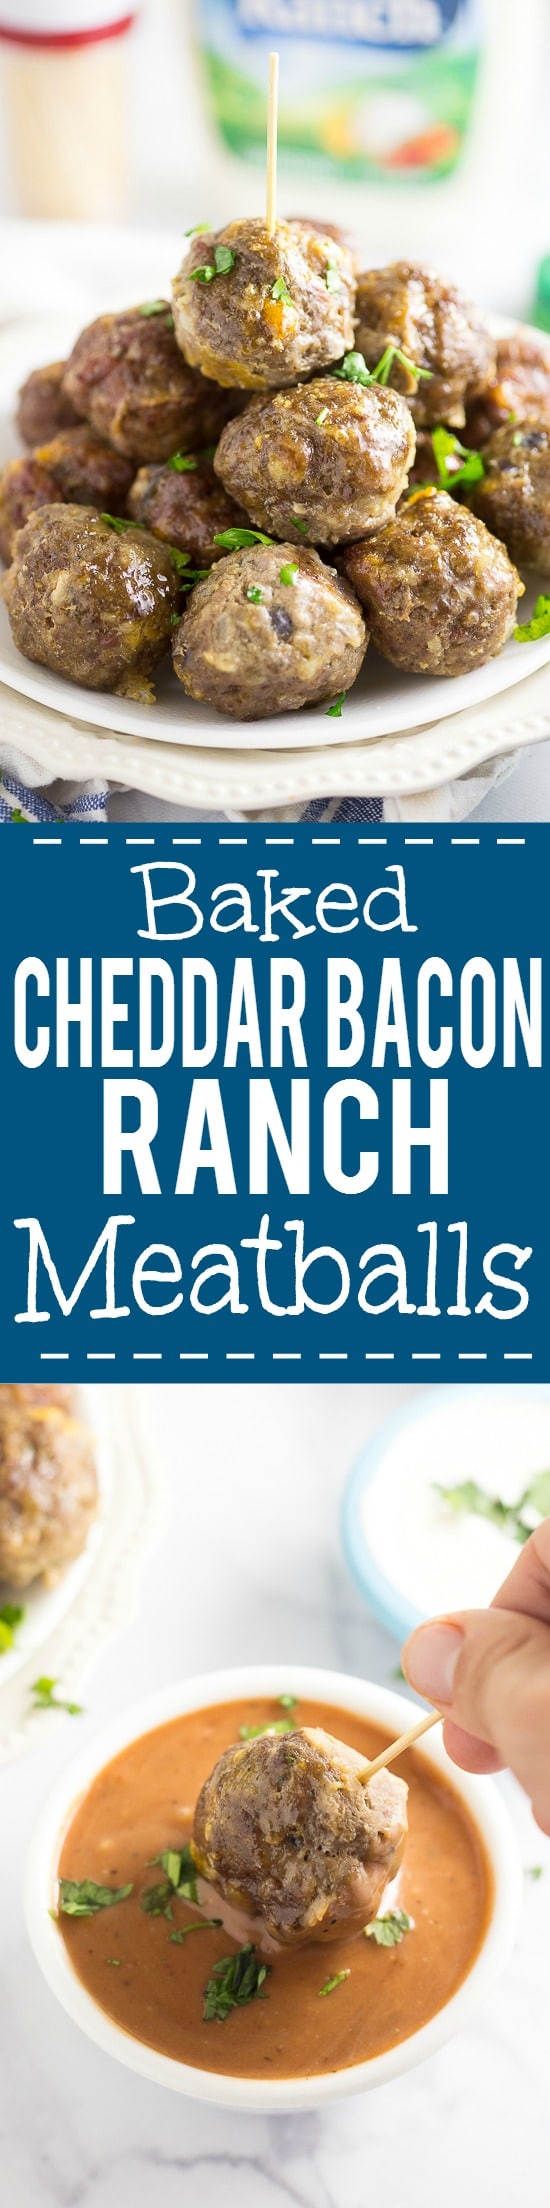 Baked Cheddar Bacon Ranch Meatballs Recipe - These tangy, zesty Baked Cheddar Bacon Ranch Meatballs have a to-die-for flavor combo and are baked in the oven for a delicious, quick and easy appetizer recipe. 